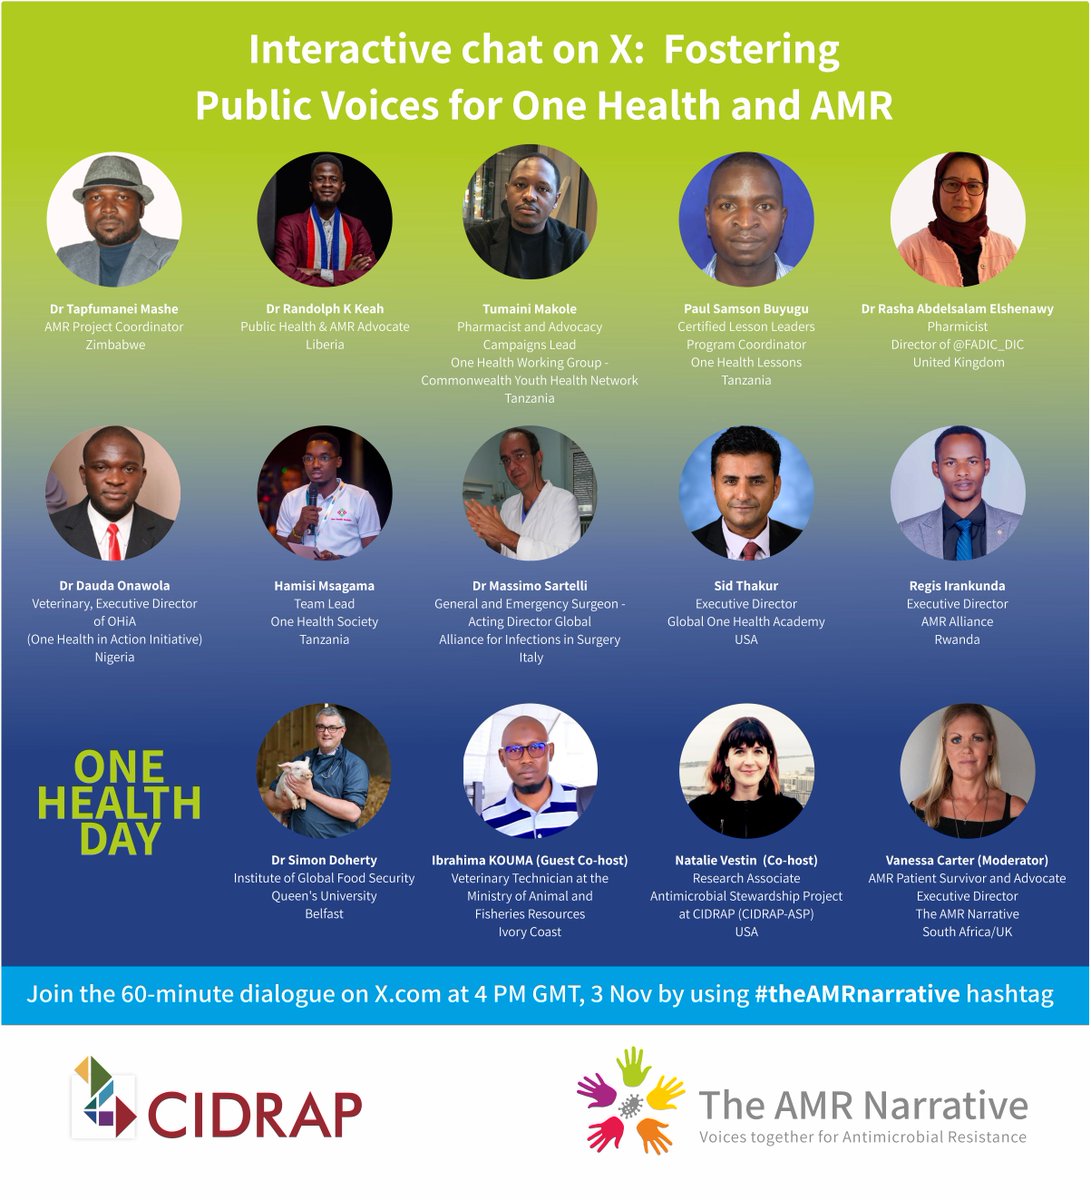 Join our distinguished guests this Friday, 3 Nov at 4pm GMT for an interactive dialogue about how we can foster public voices for #OneHealth and #AMR in partnership with @CIDRAP_ASP featuring special co-host @alkhalilkouma. EVERYONE WELCOME! To take part, type your answers…